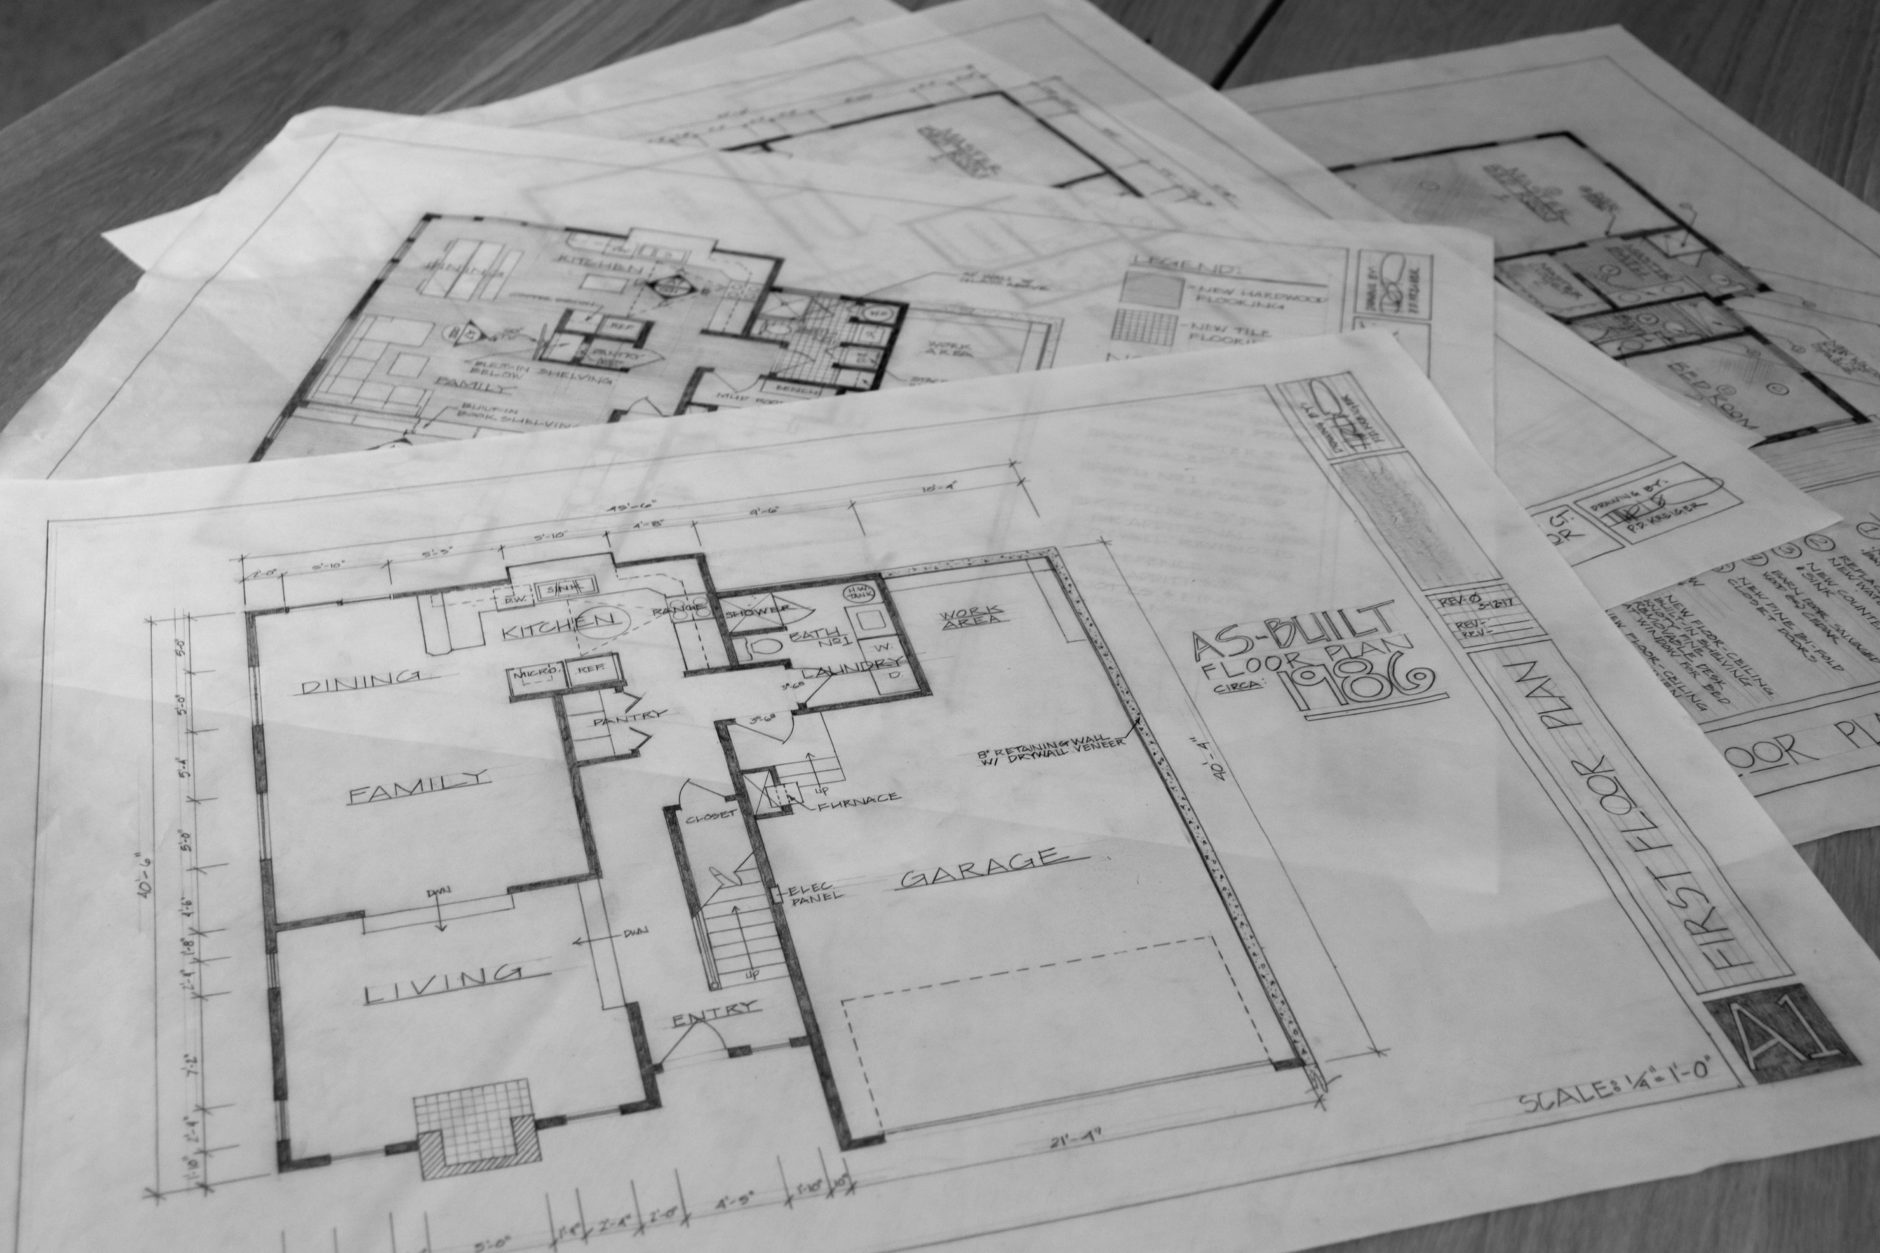 Drawings of house plans